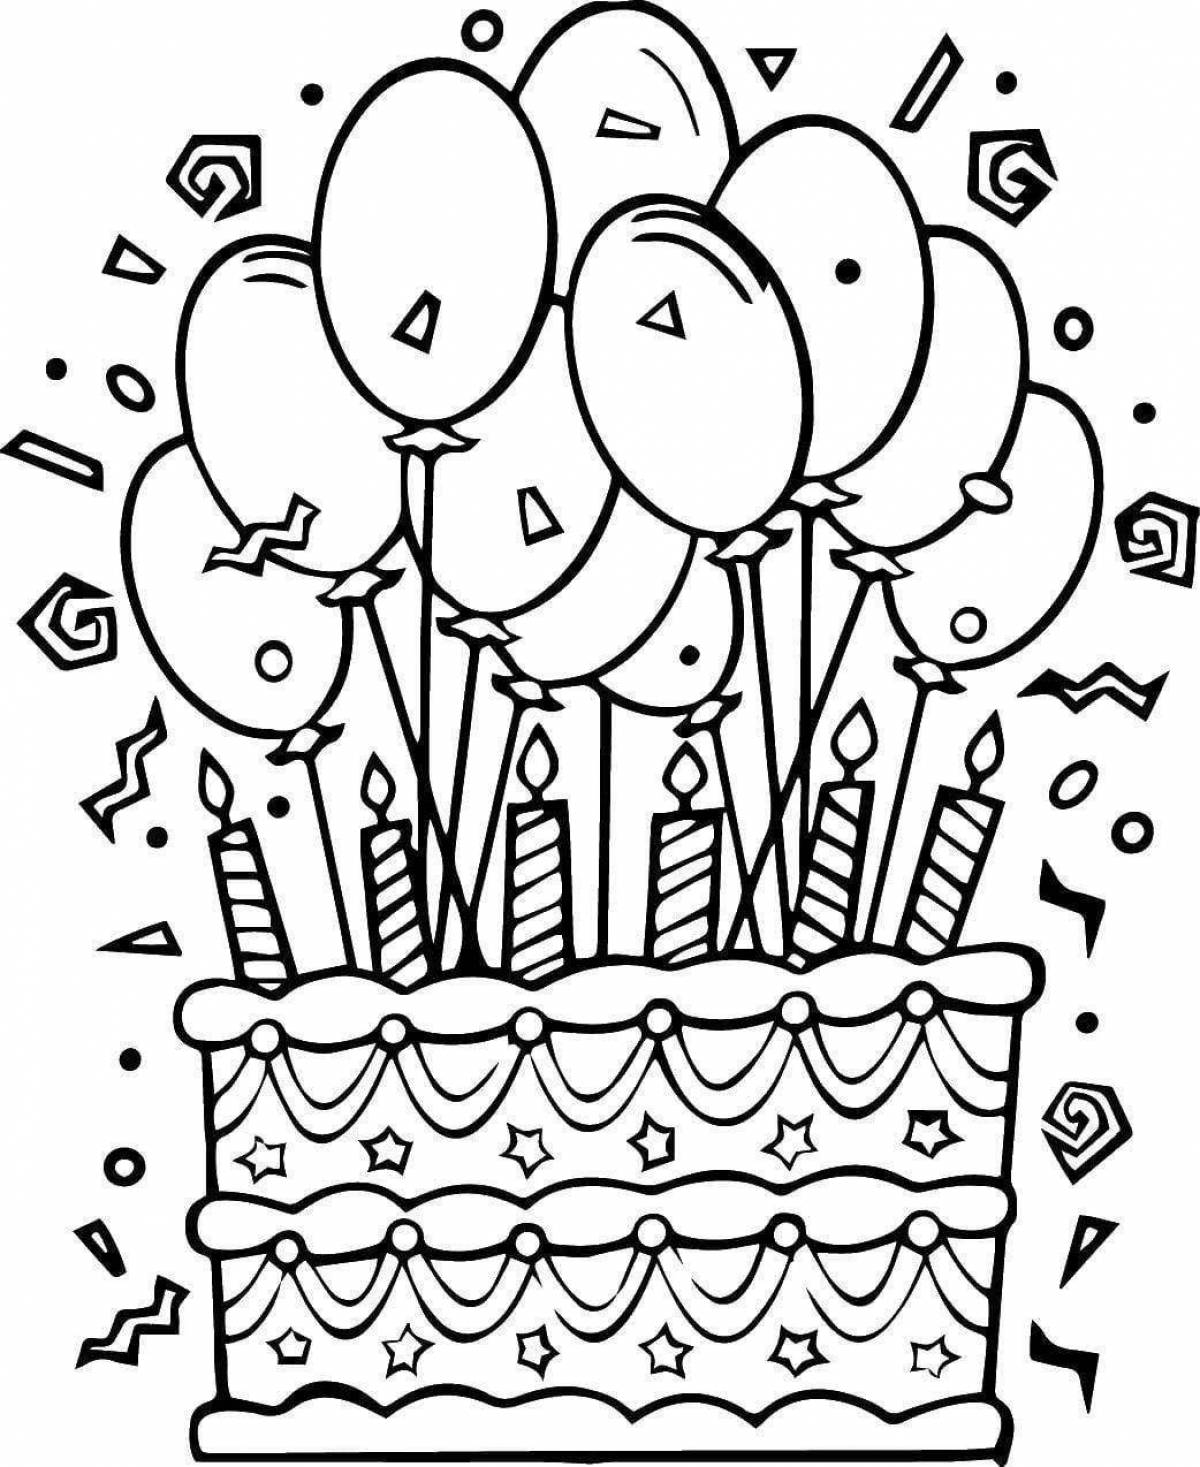 Happy birthday girl coloring page